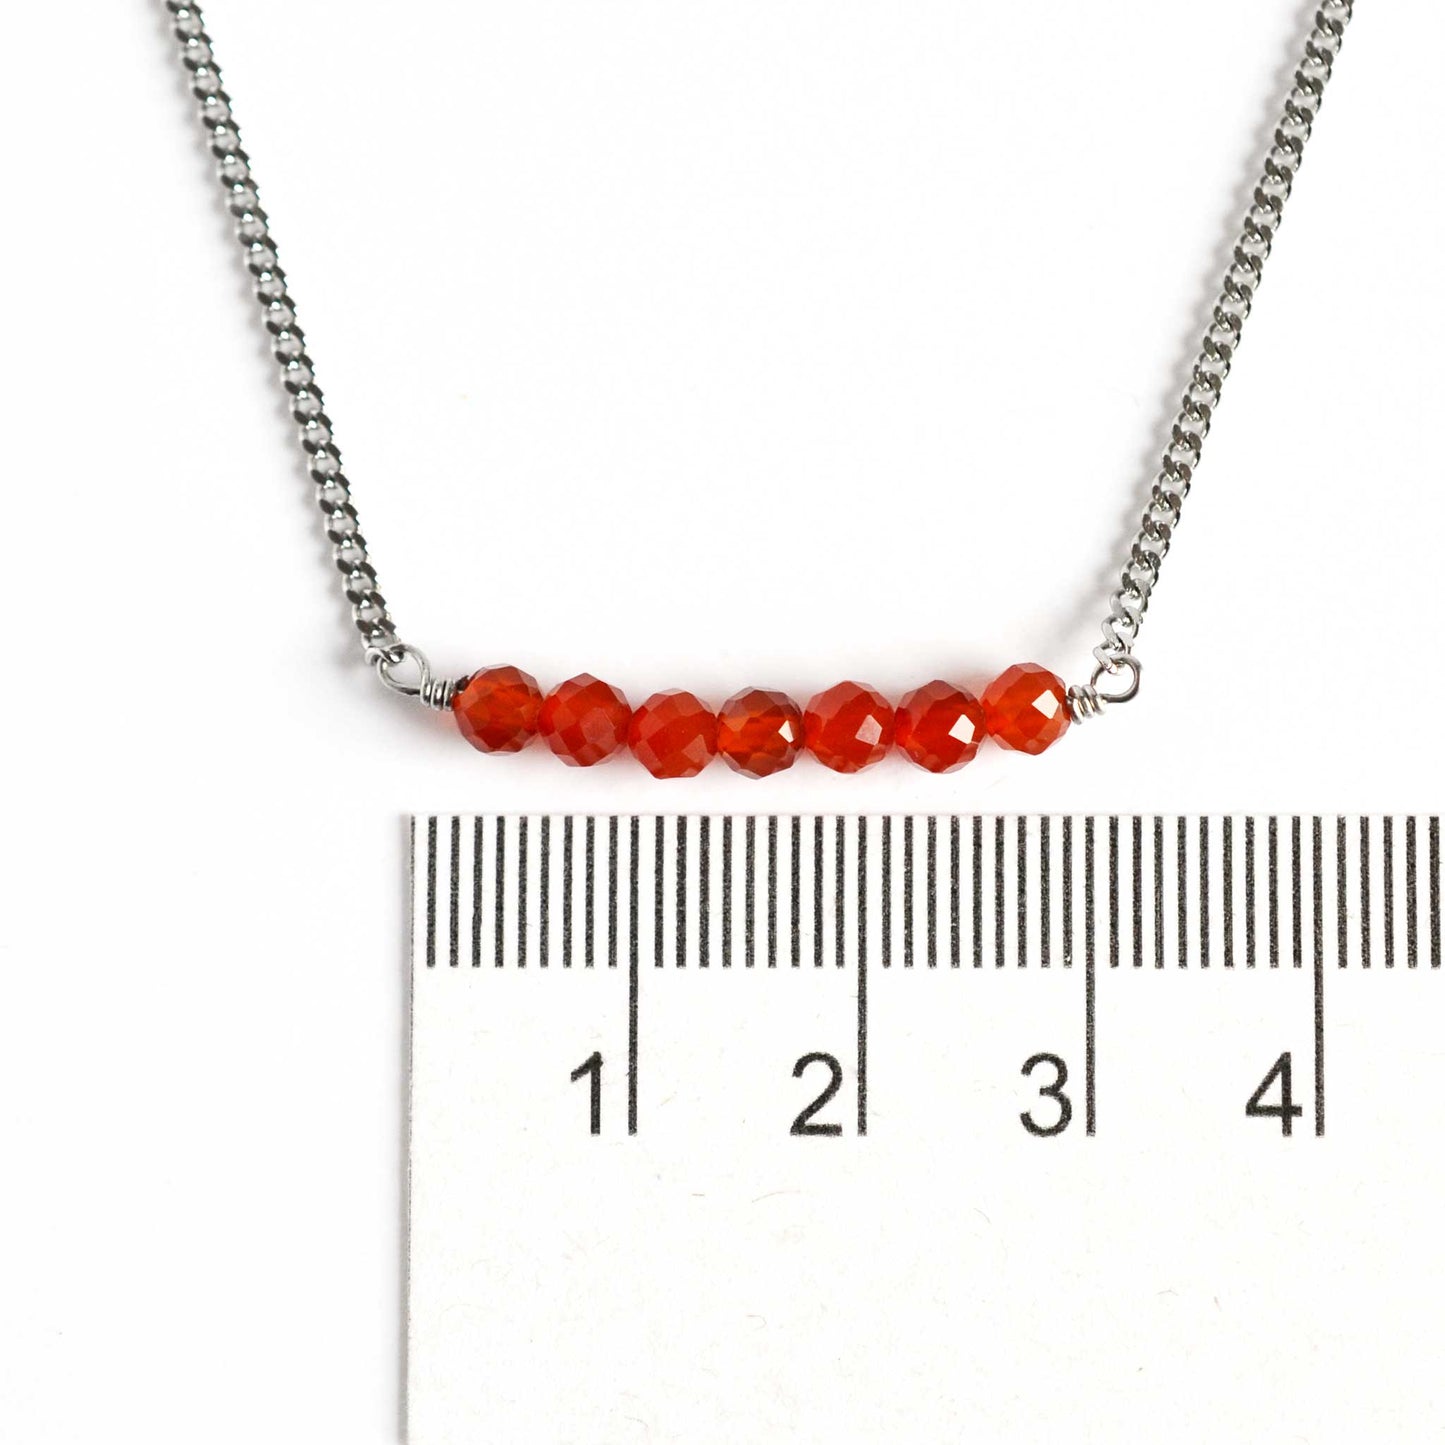 Dainty Carnelian necklace with orange stones 4mm next to ruler